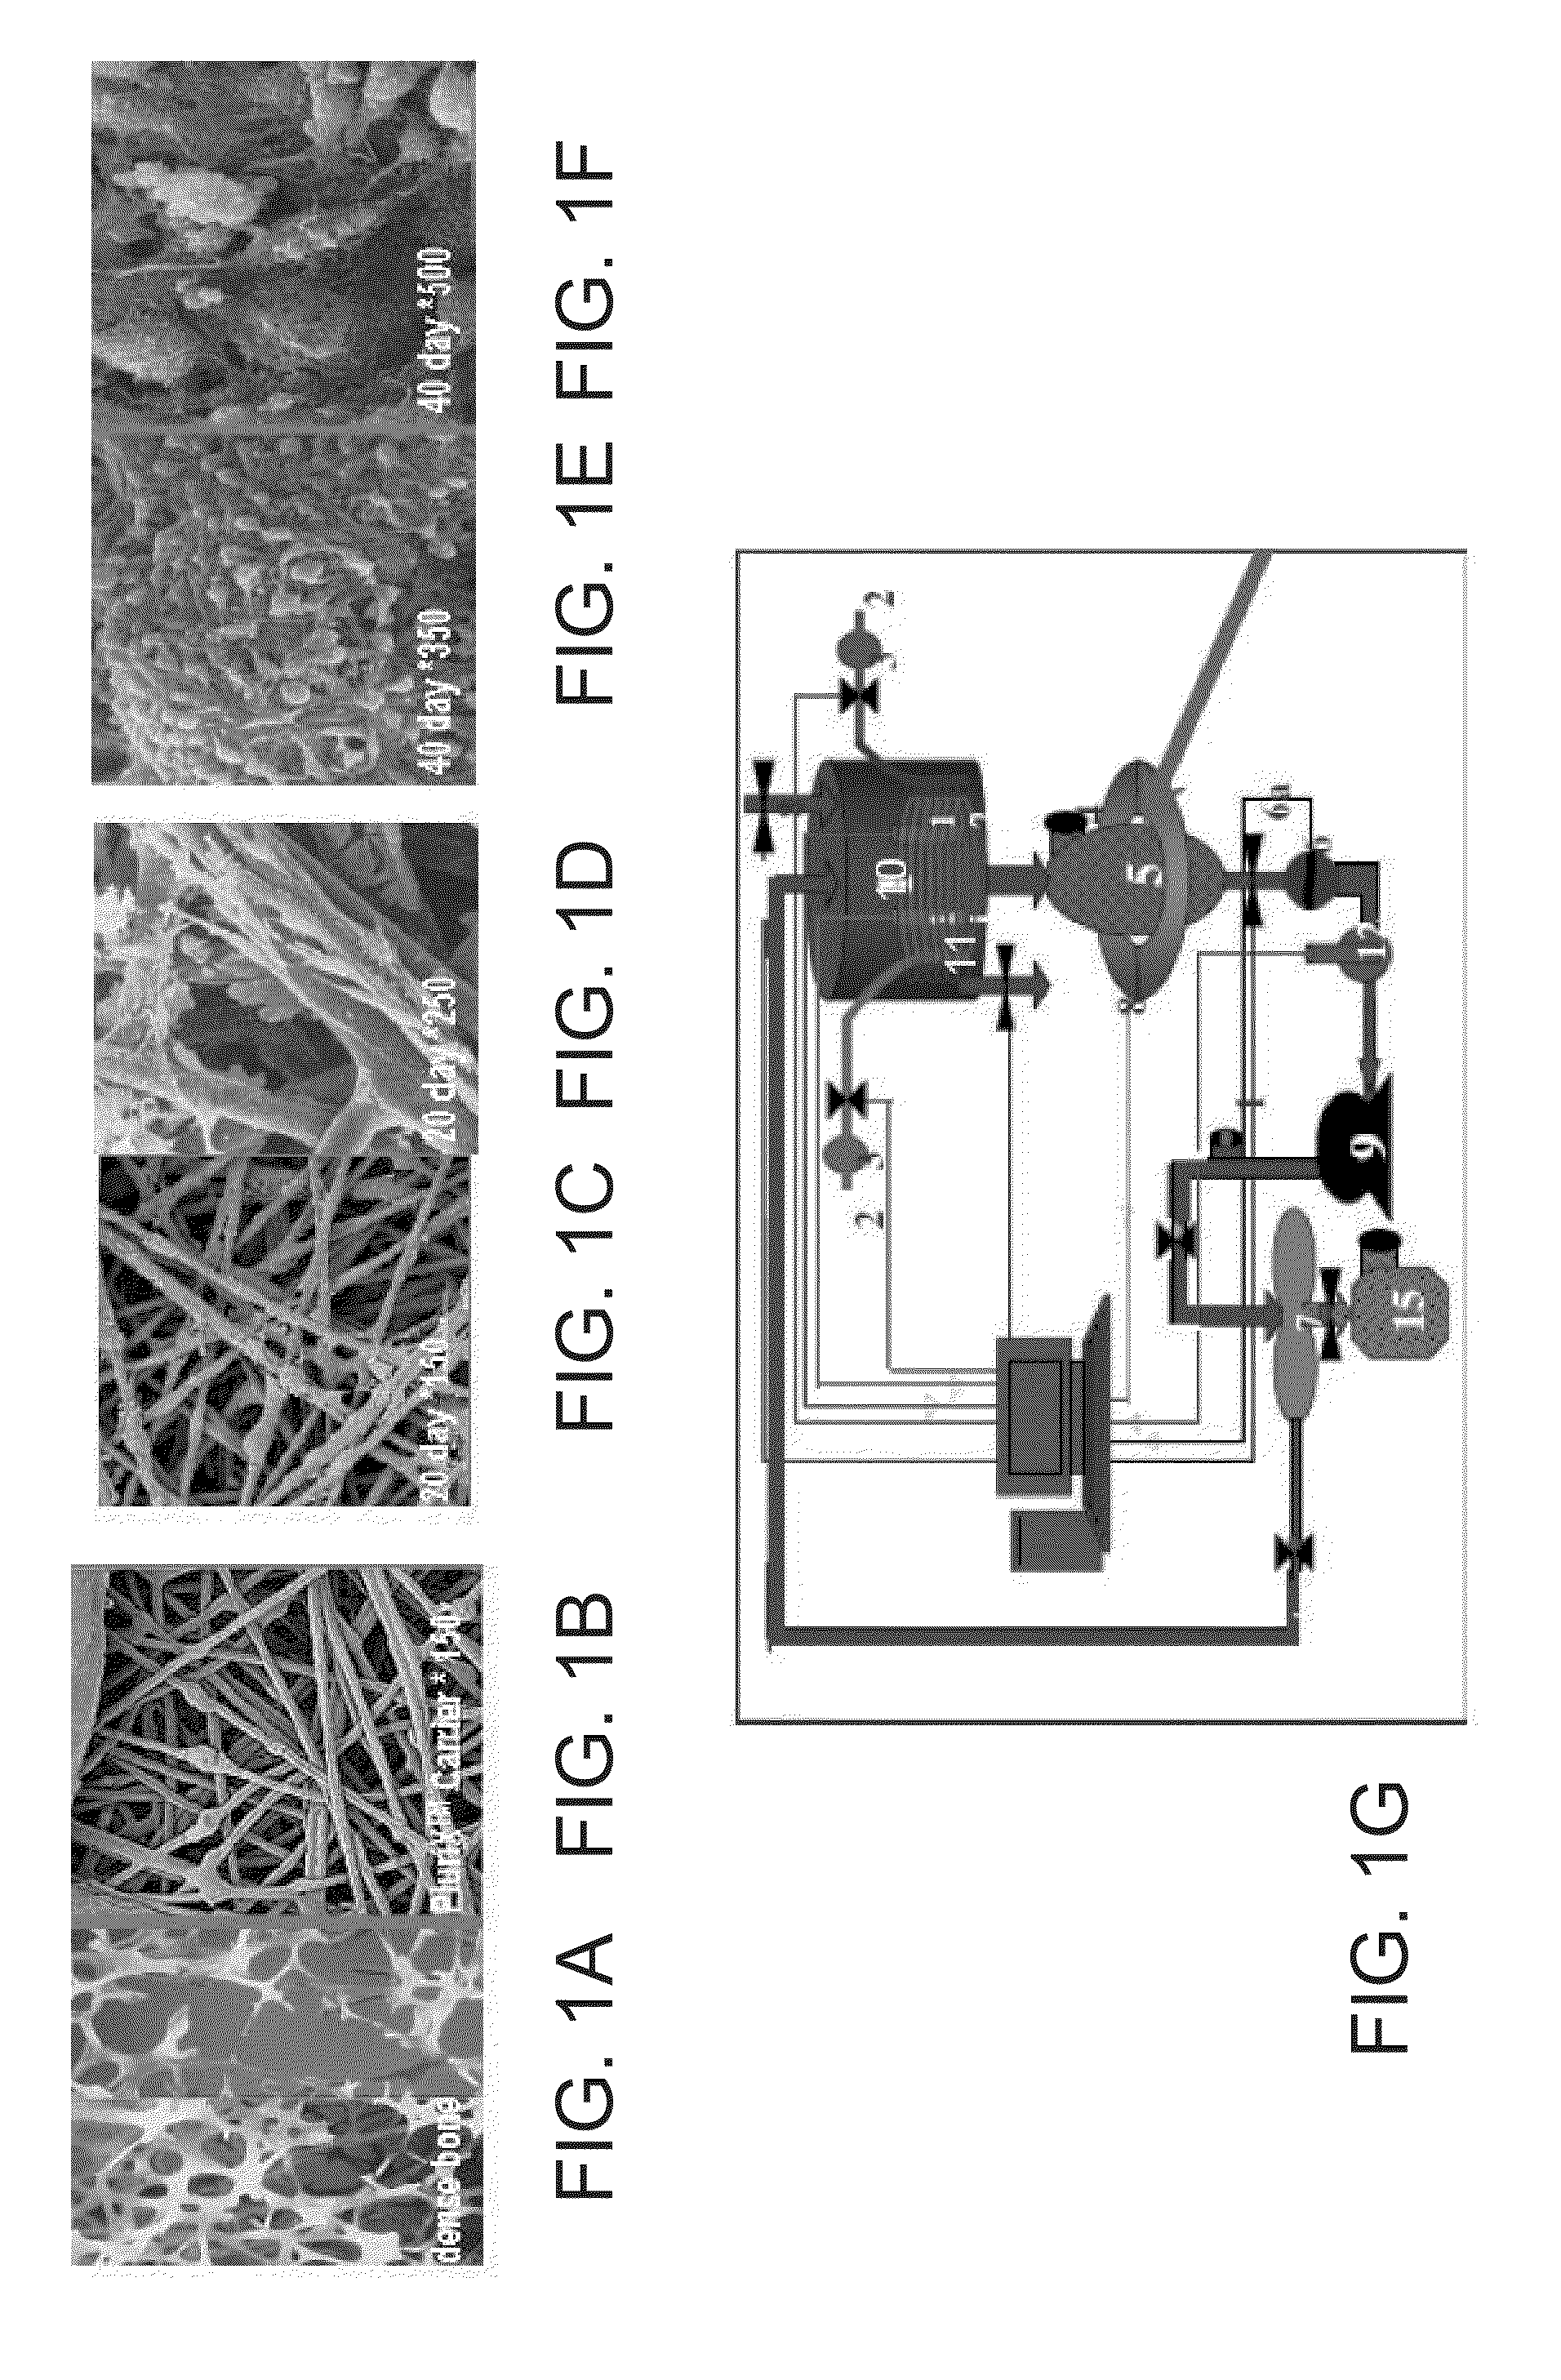 Adherent cells from adipose or placenta tissues and use thereof in therapy